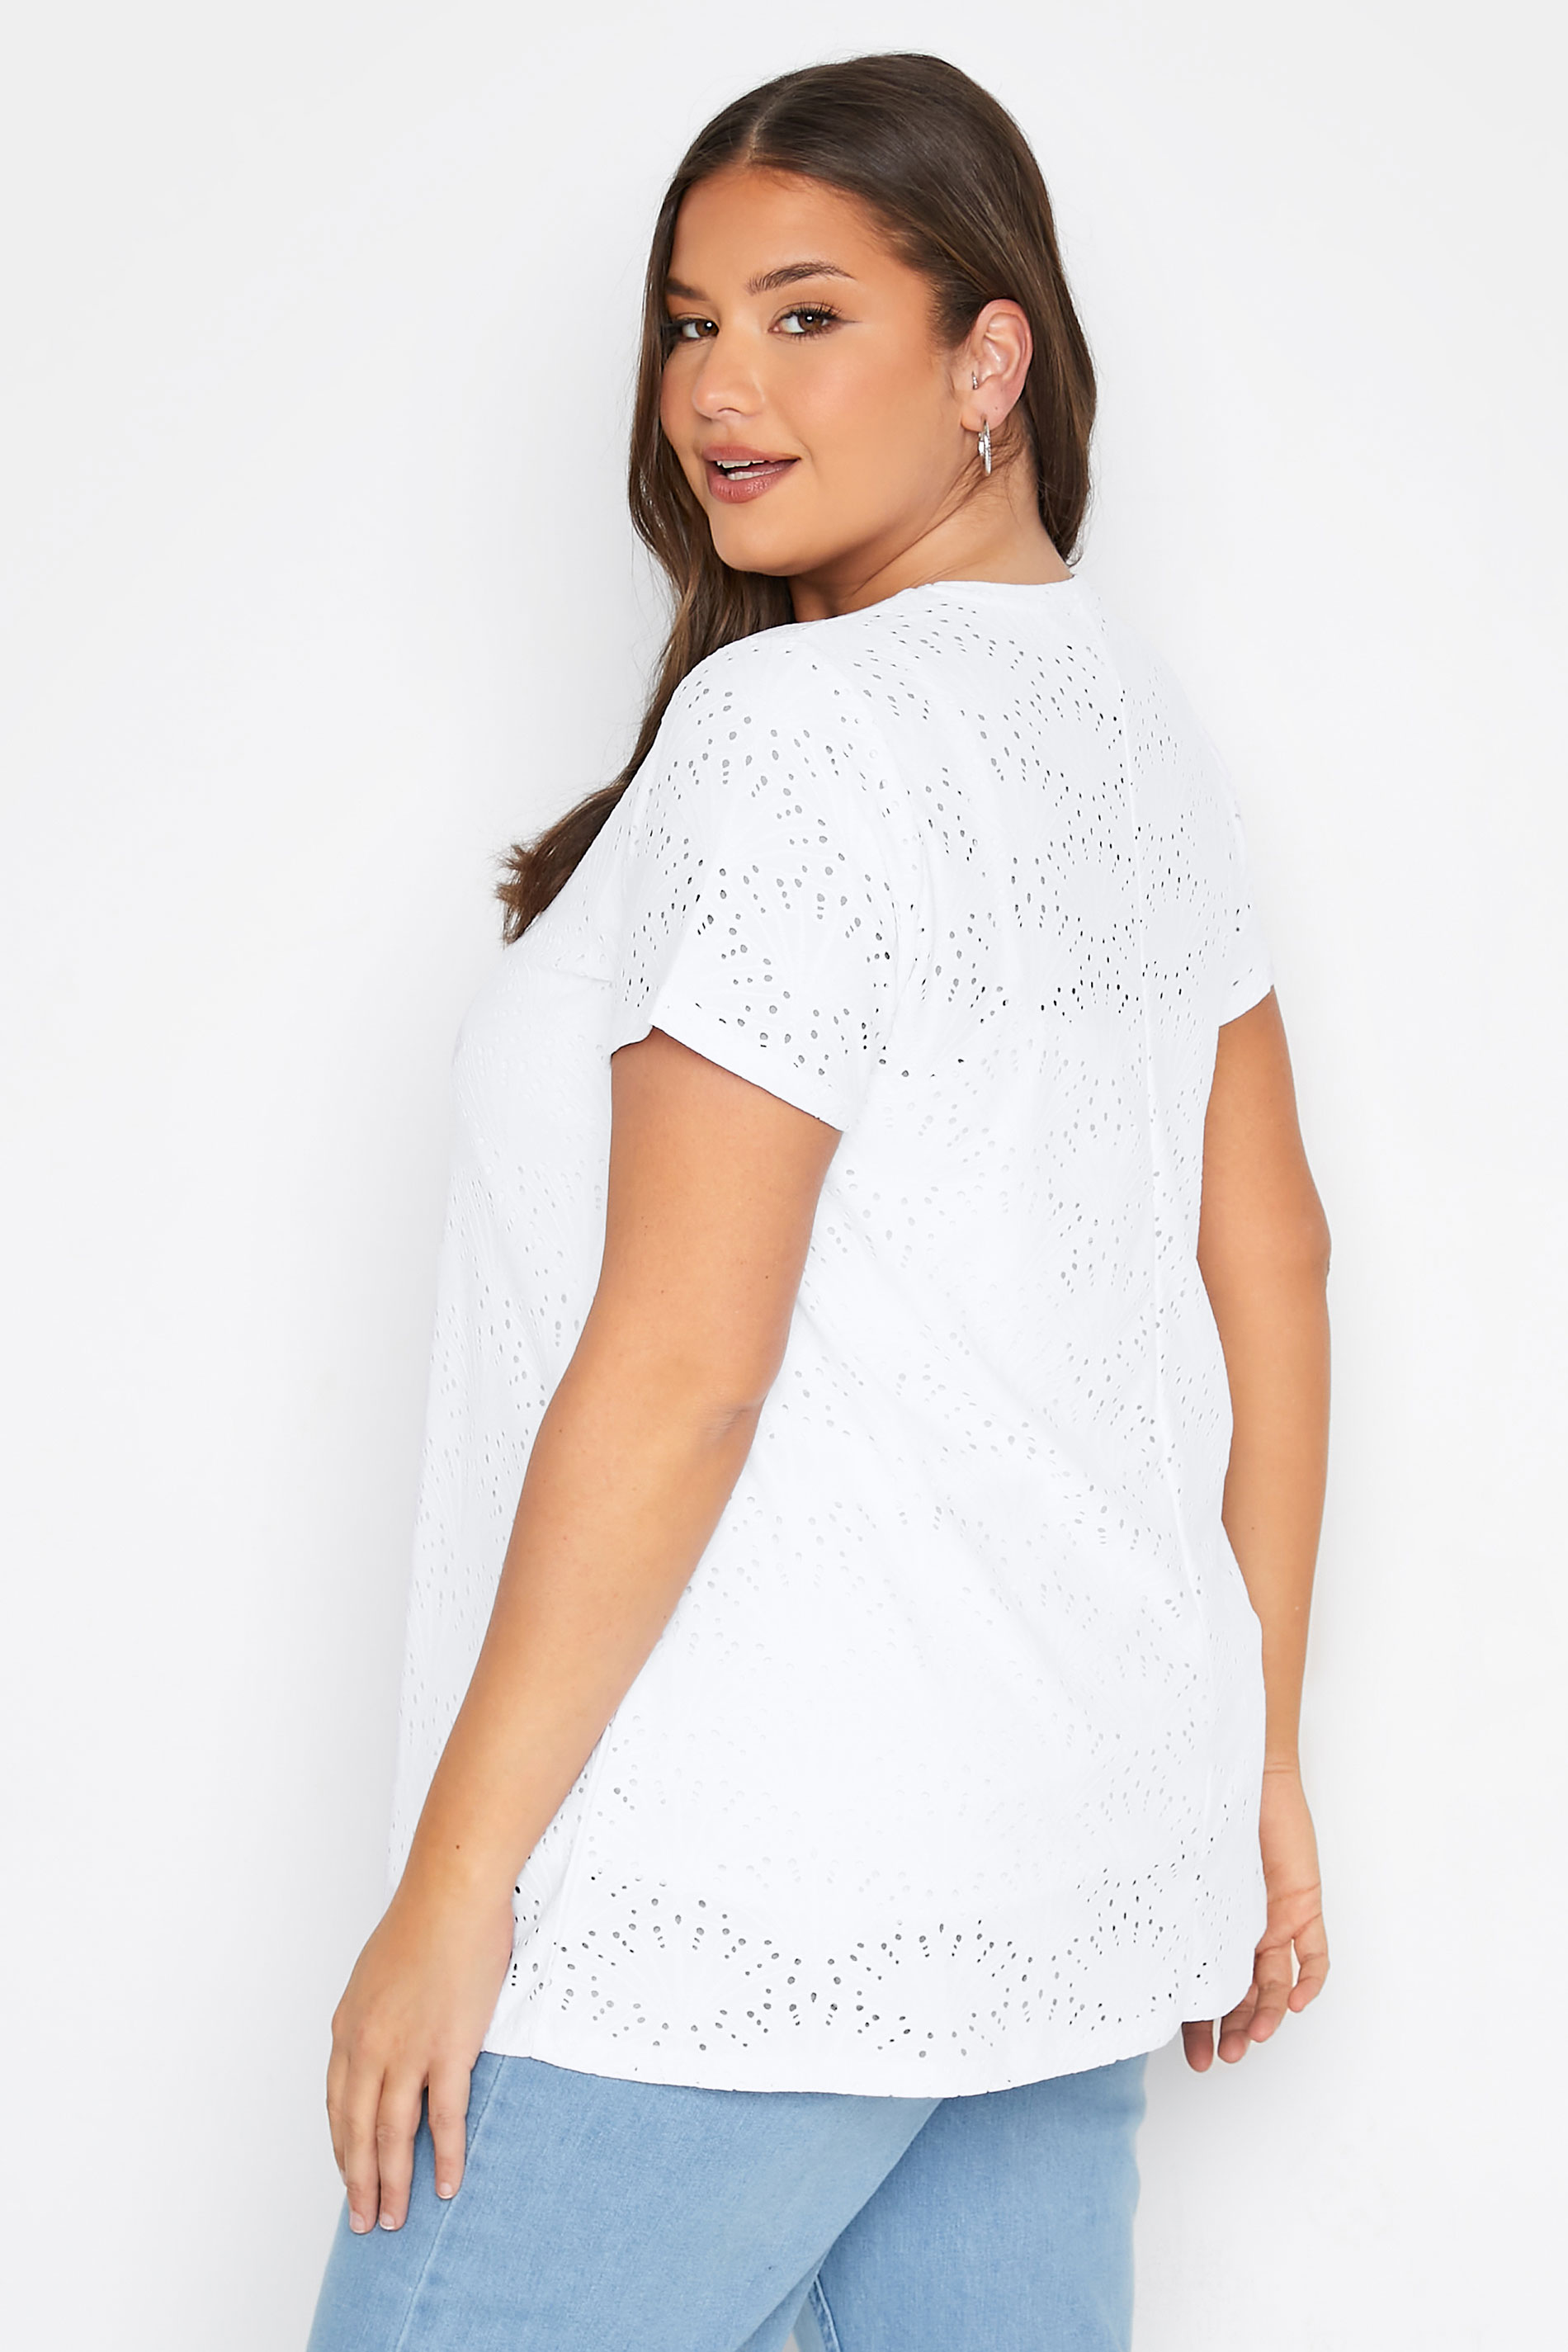 Grande taille  Tops Grande taille  Tops Jersey | Top Blanc Broderie Anglaise Manches Courtes en Jersey - GK46125